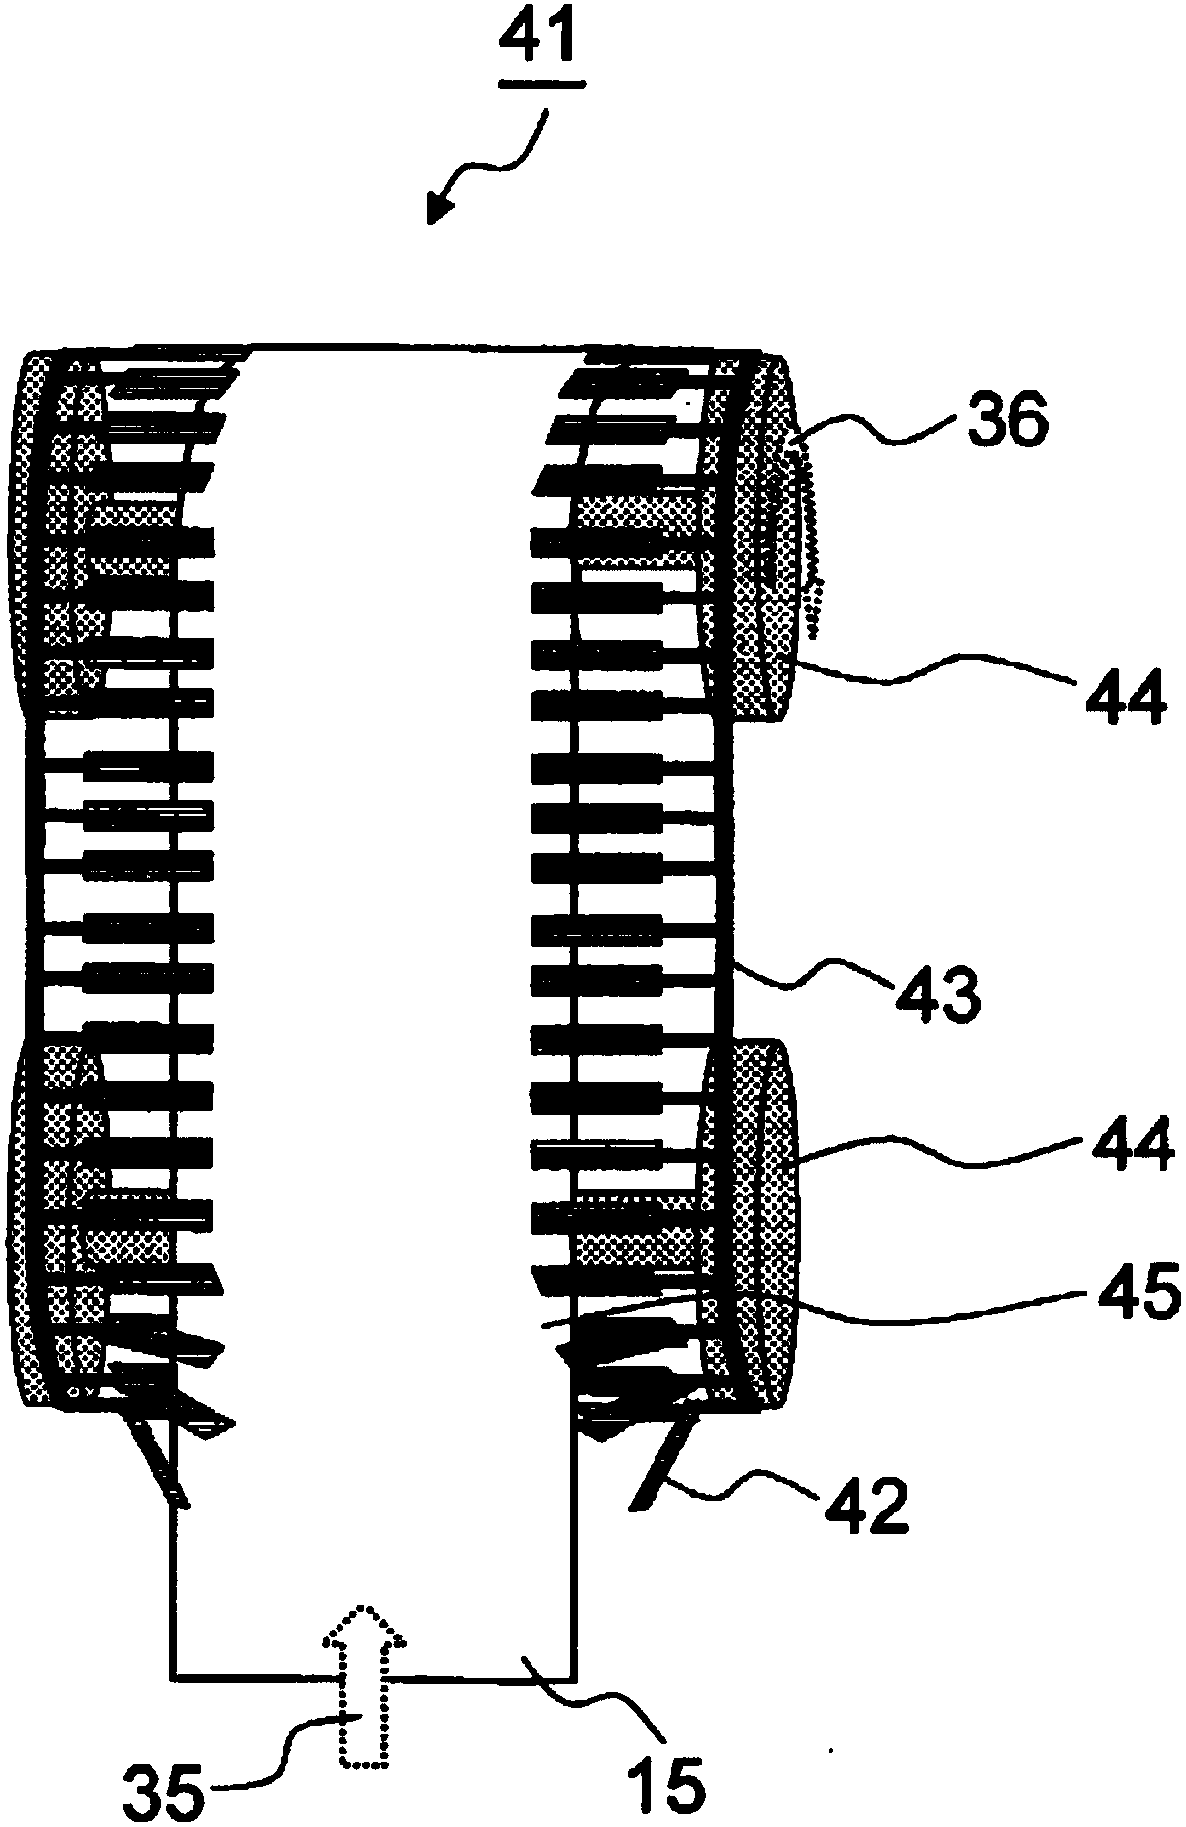 Rolled film formation apparatus